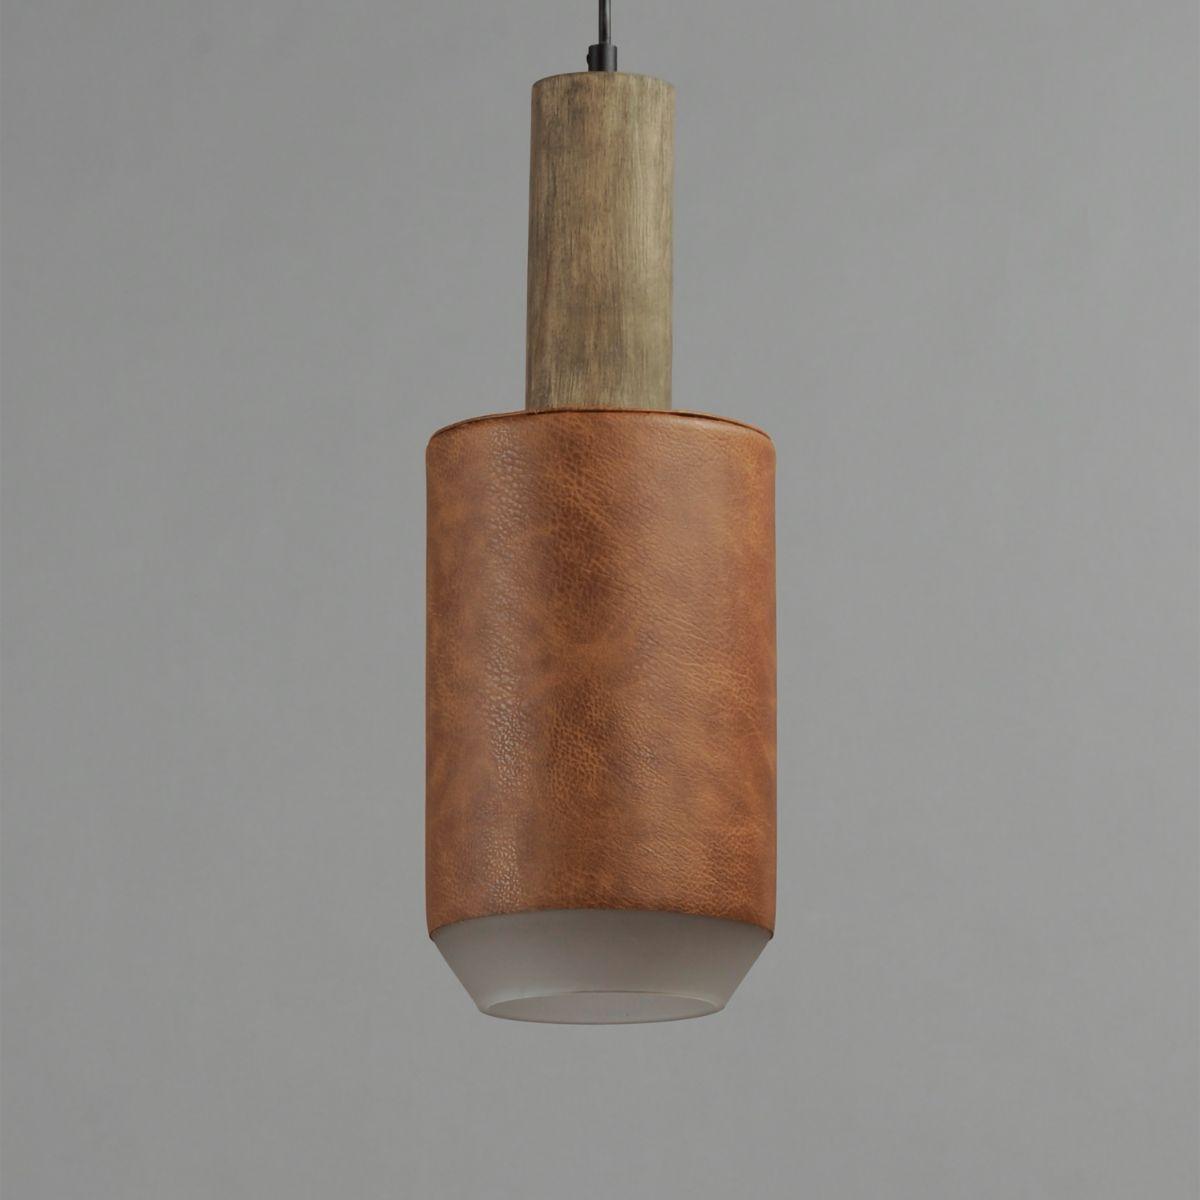 SCOUT 7 in. LED Pendant Light Weathered Wood & Tan Leather